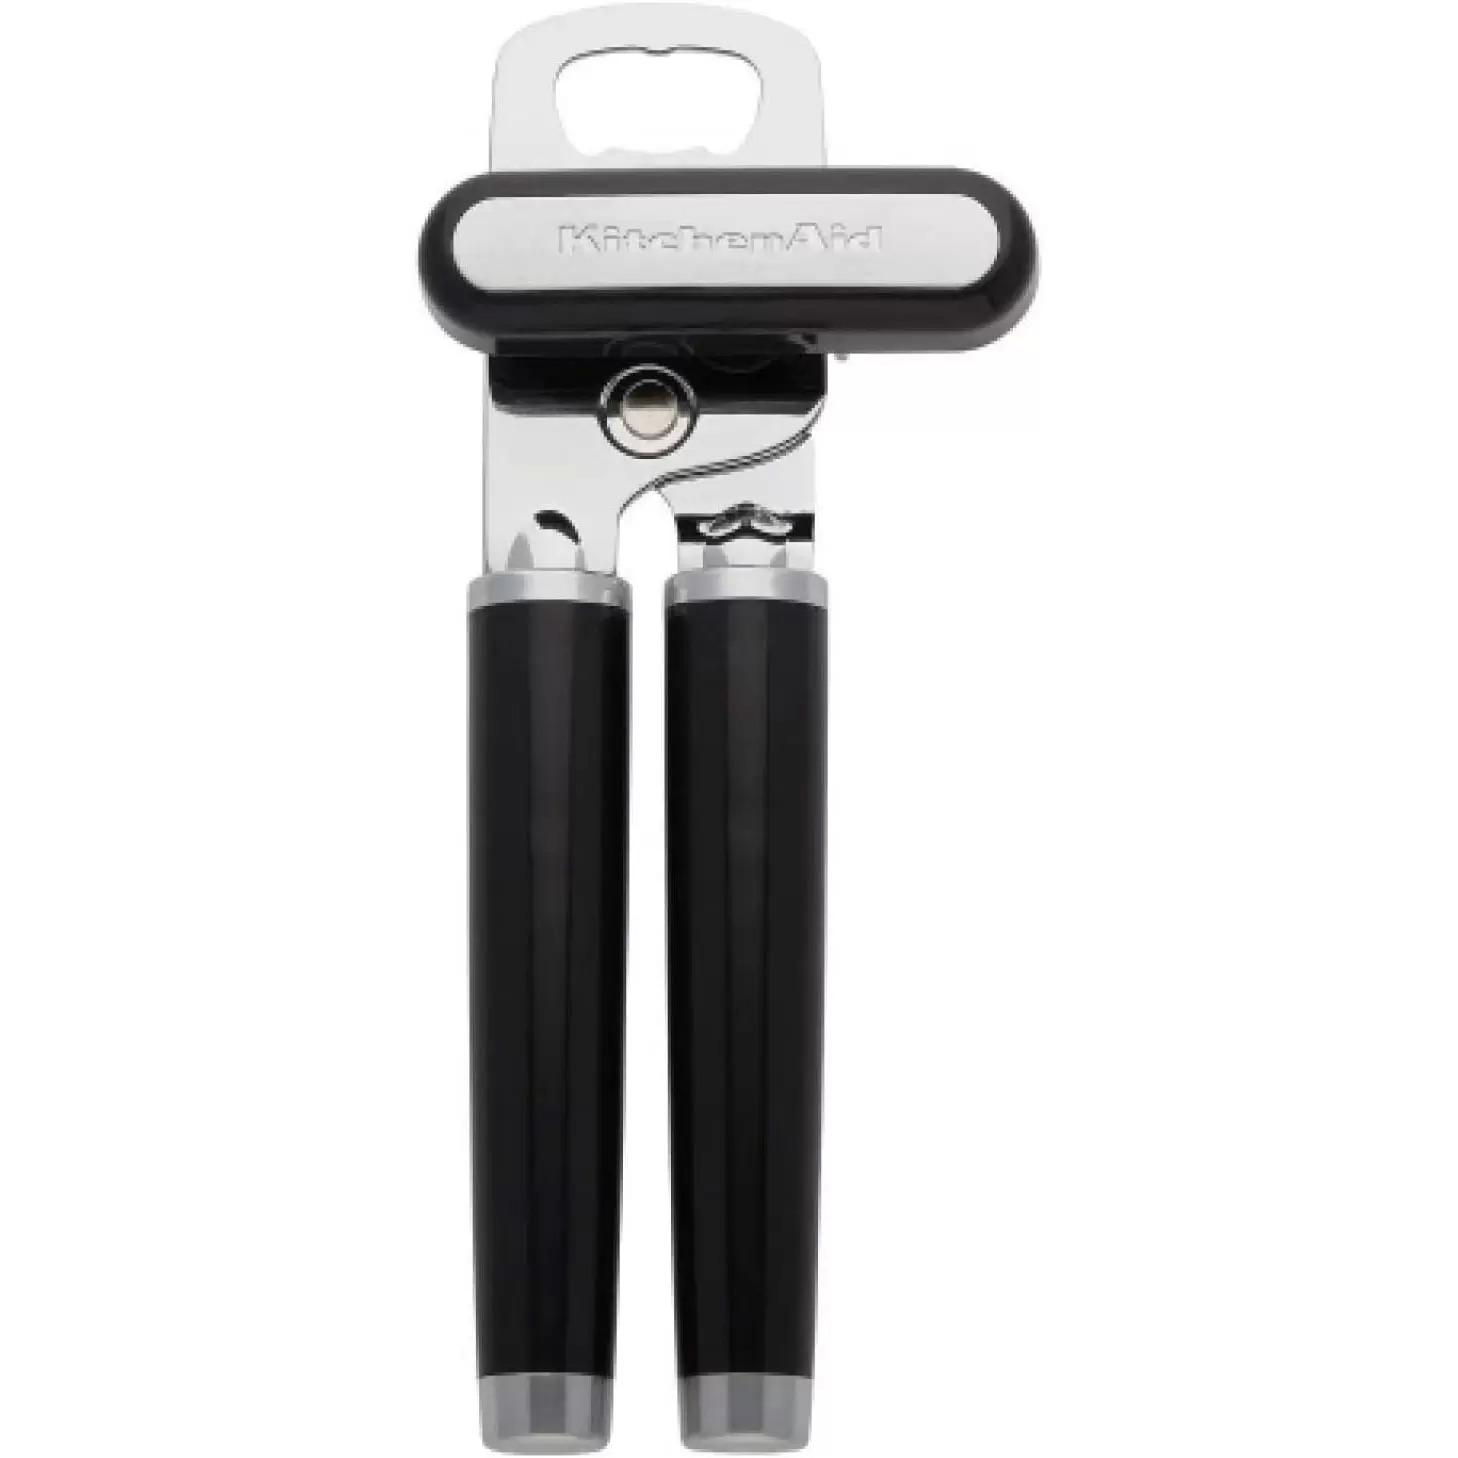 KitchenAid Classic Multifunction Can Opener Bottle Opener for $8.49